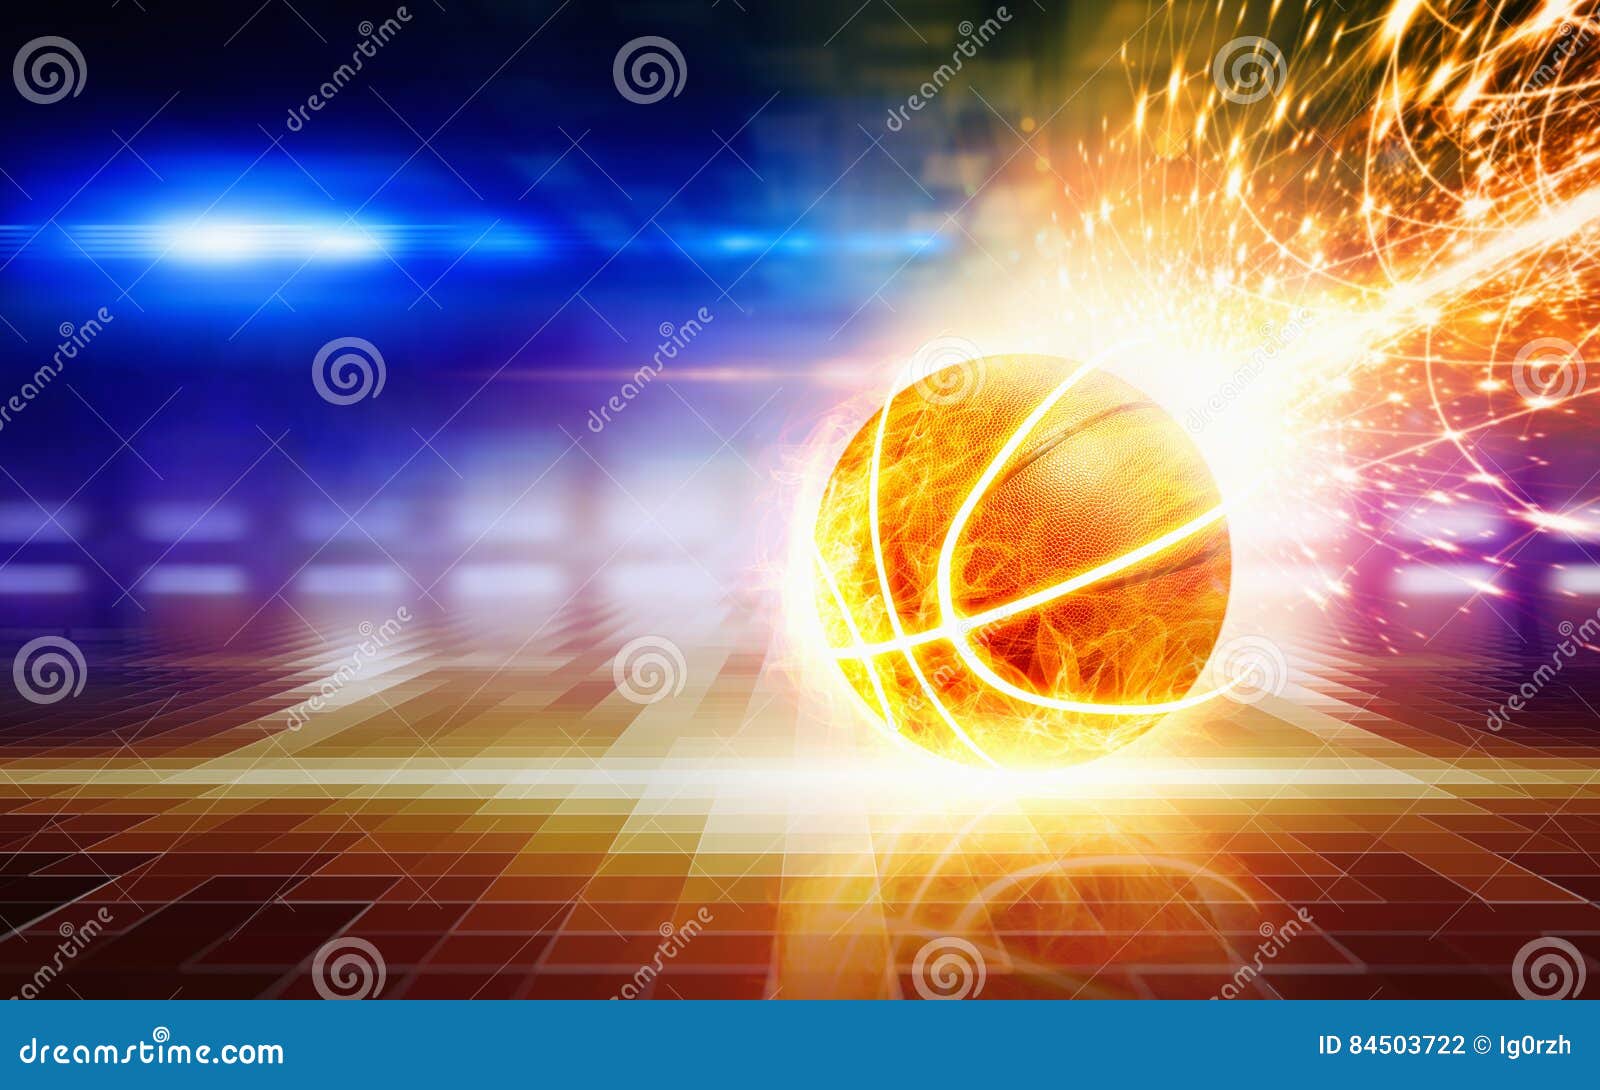 abstract sports background - burning basketball